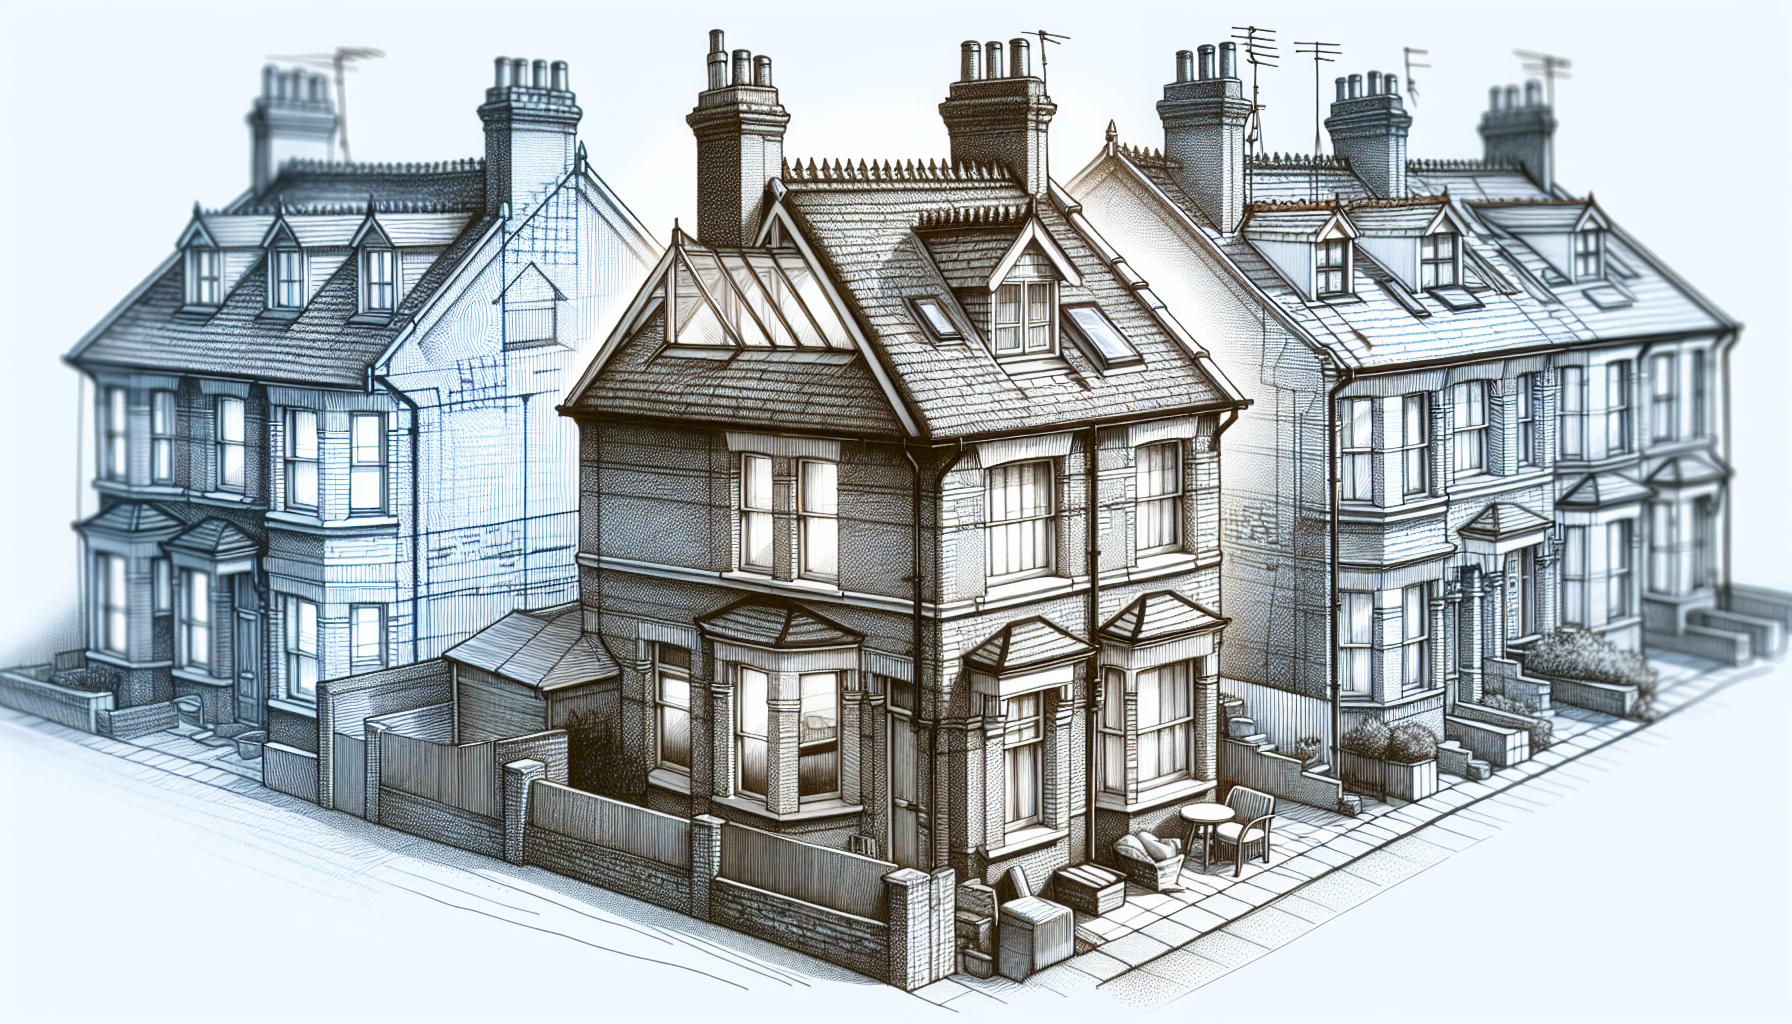 Illustration of a terraced house with a loft conversion